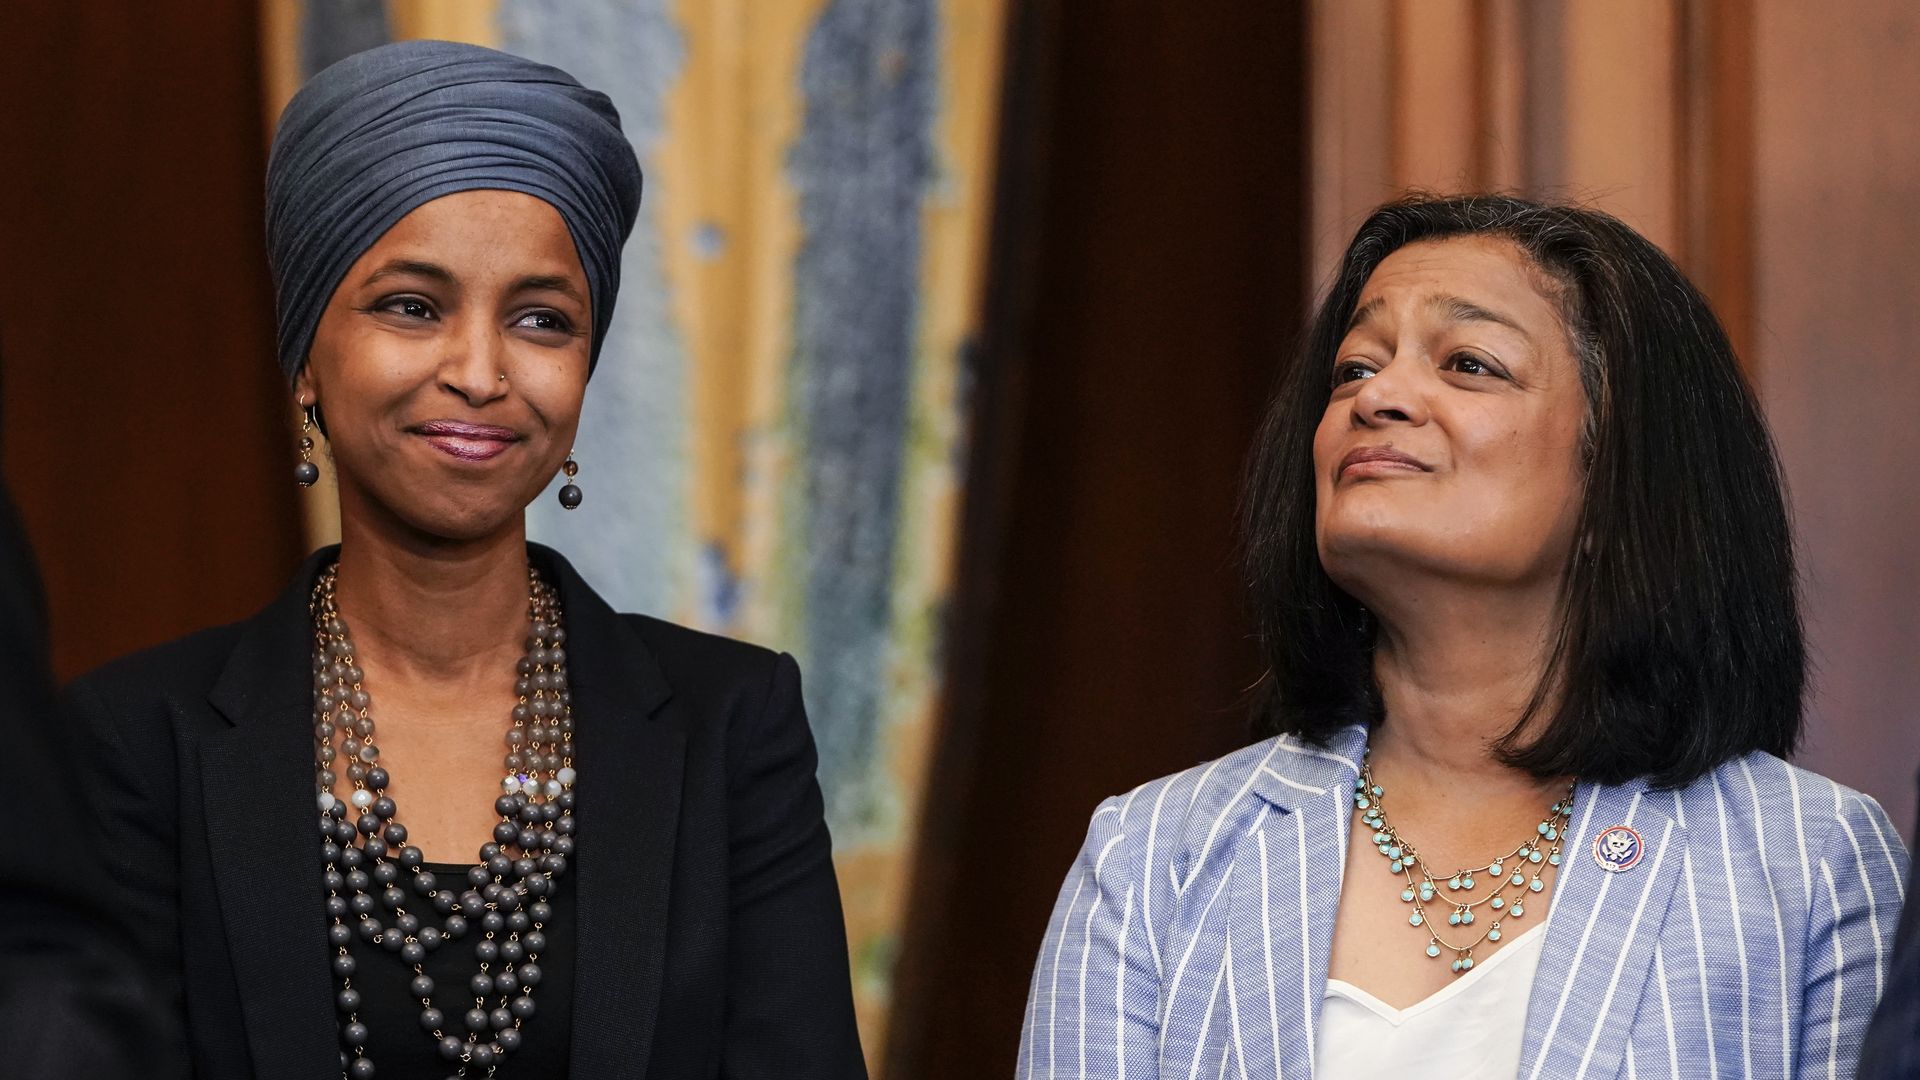 Rep. Ilhan Omar, wearing a blue headscarf, black blazer and black shirt with beaded necklaces, and Rep. Pramila Jayapal, wearing a baby blue blazer with white stripes, a white shirt and a turquoise necklace.